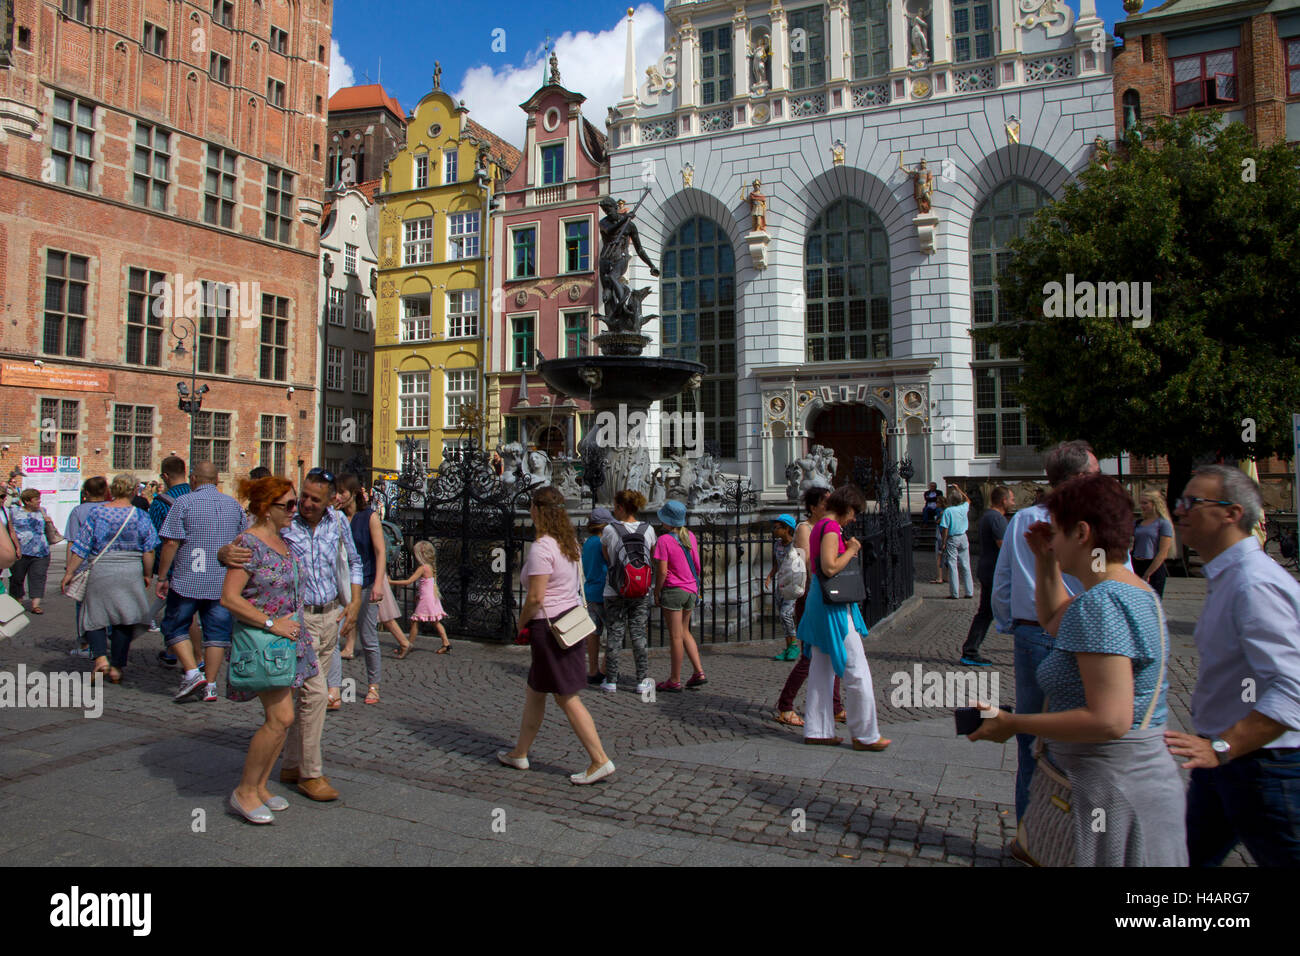 Magnificent buildings of mixed Gothic, Baroque and Renaissaince style, many dating to the Middle Ages, Dluga Street, Gdansk Stock Photo